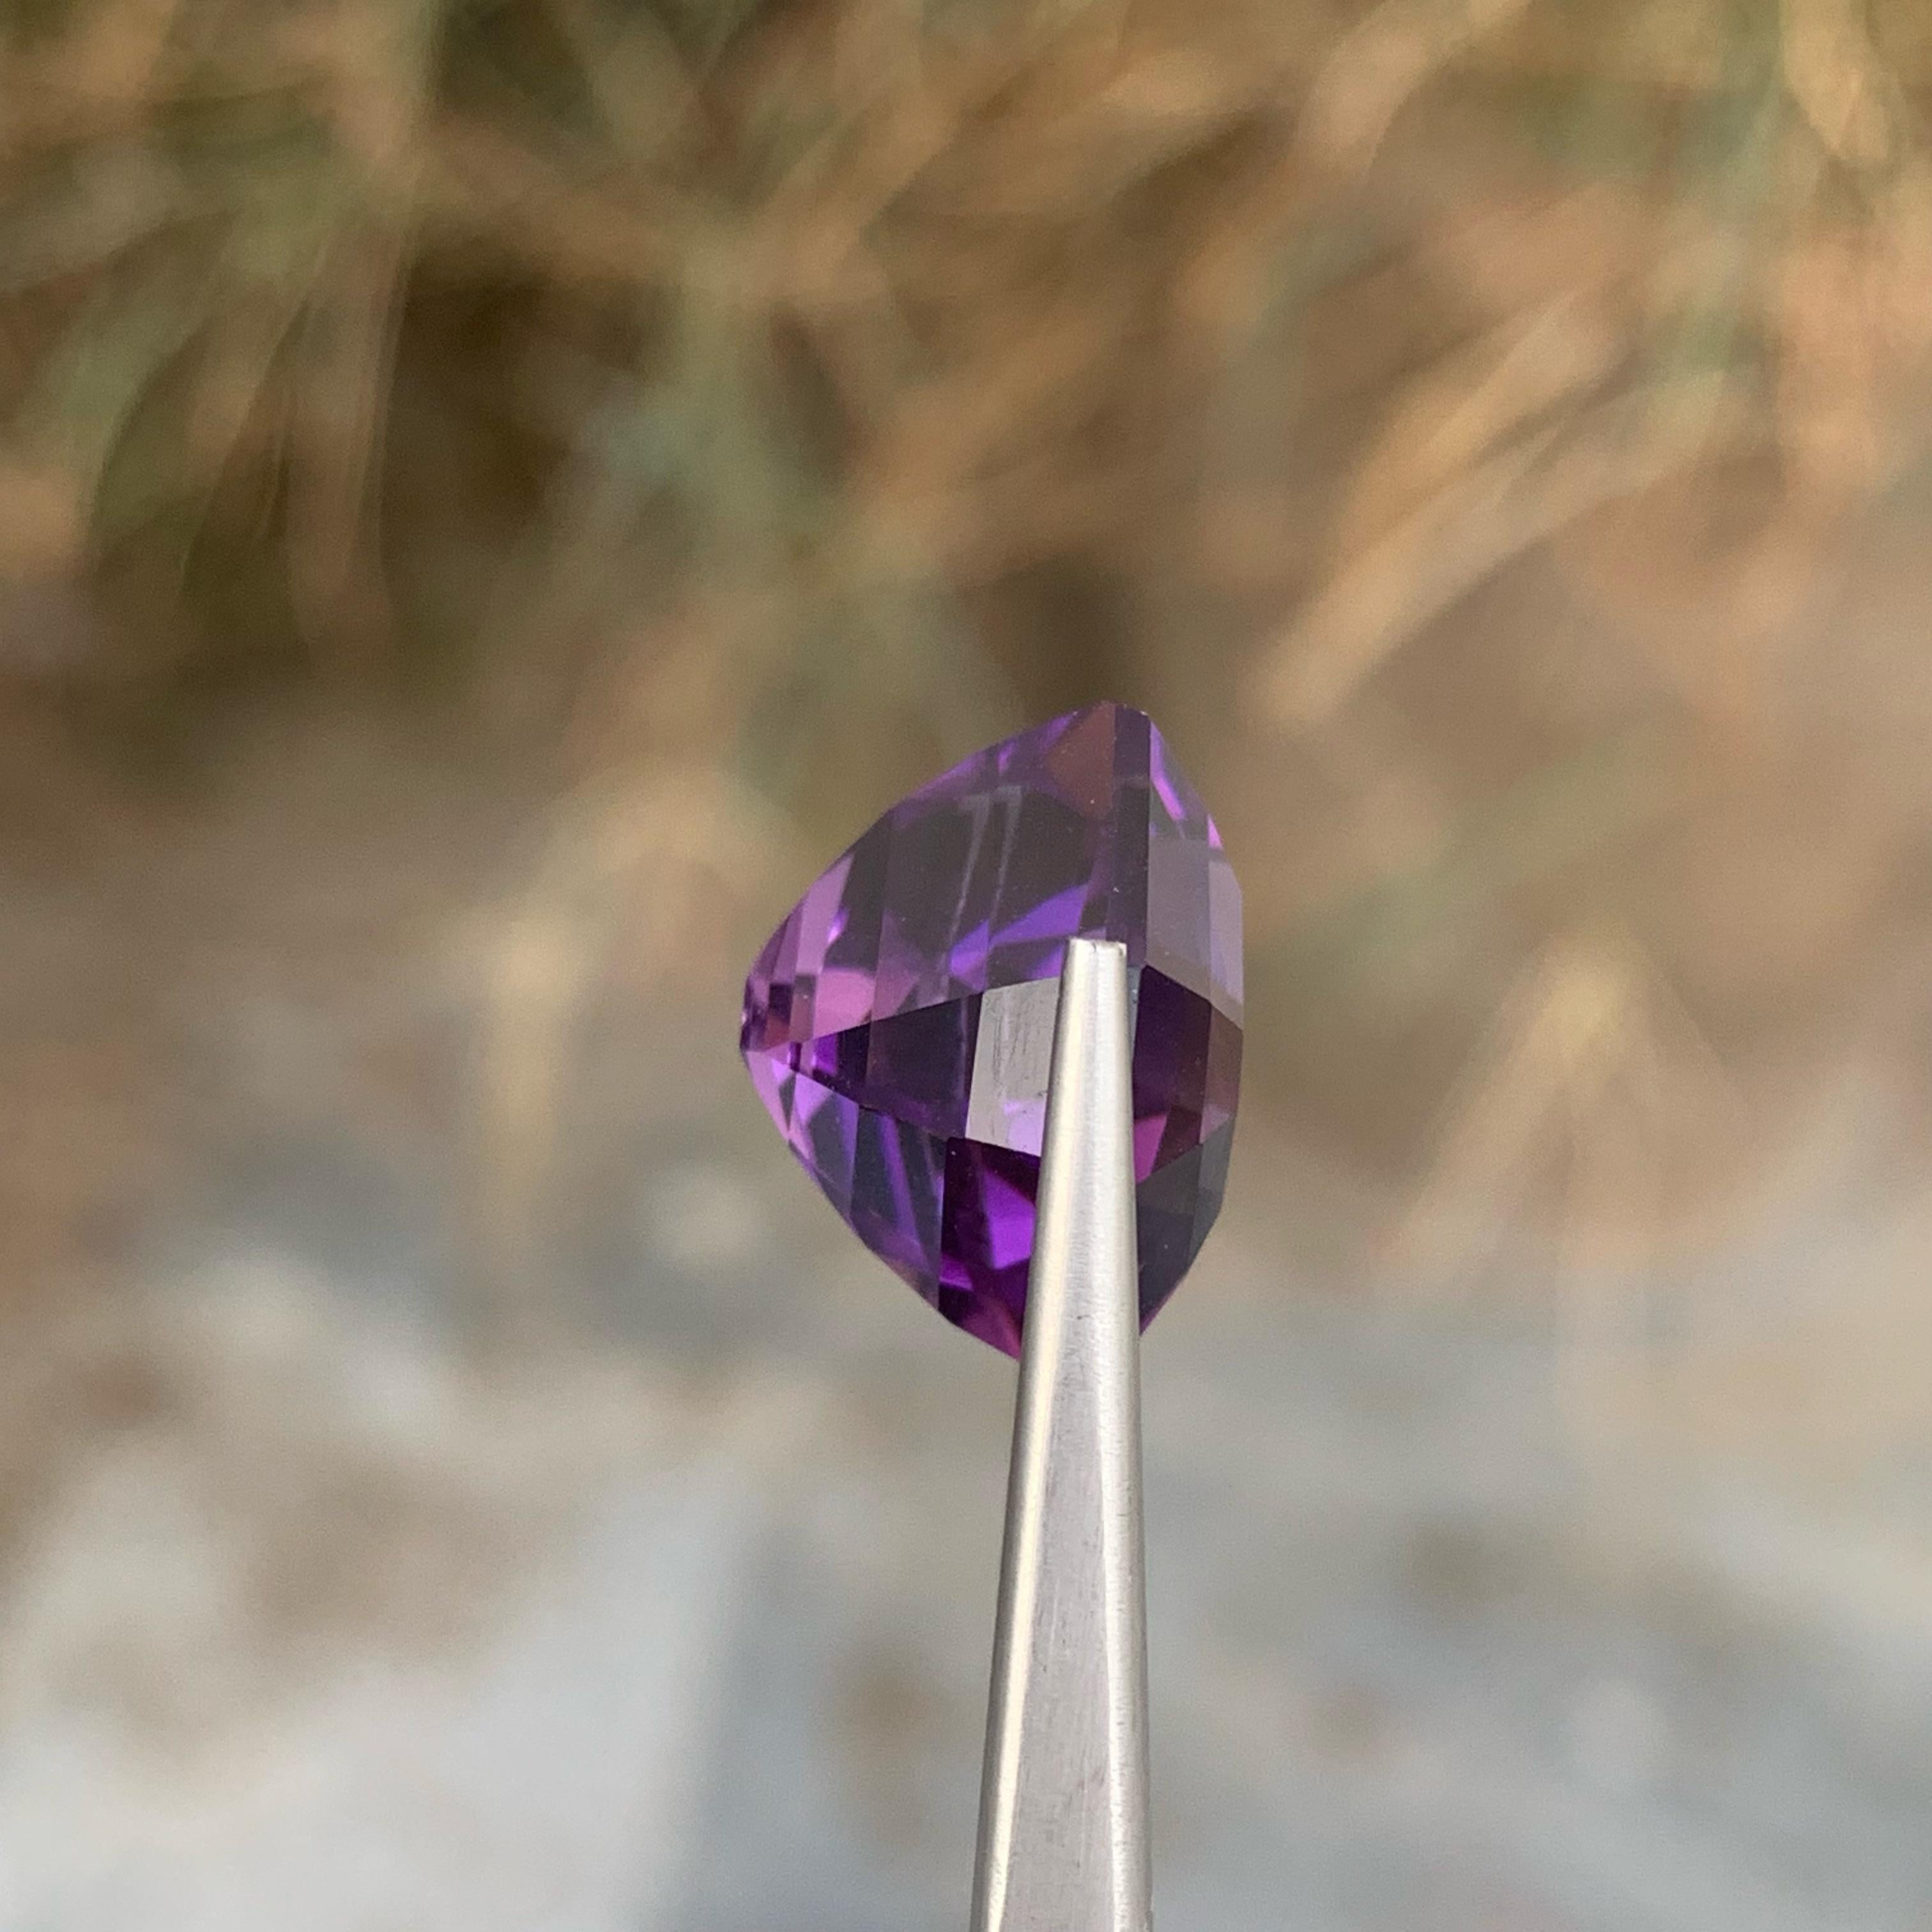 Weight 13.10 carats 
Dimensions 14.4 x 13.4 x 10.9 mm
Treatment None 
Origin Brazil 
Clarity Eye Clean 
Shape Octagon 
Cut Emerald 



Enhance your jewelry collection with the exquisite beauty of this 13.10-carat Purple Amethyst. Mined from the rich